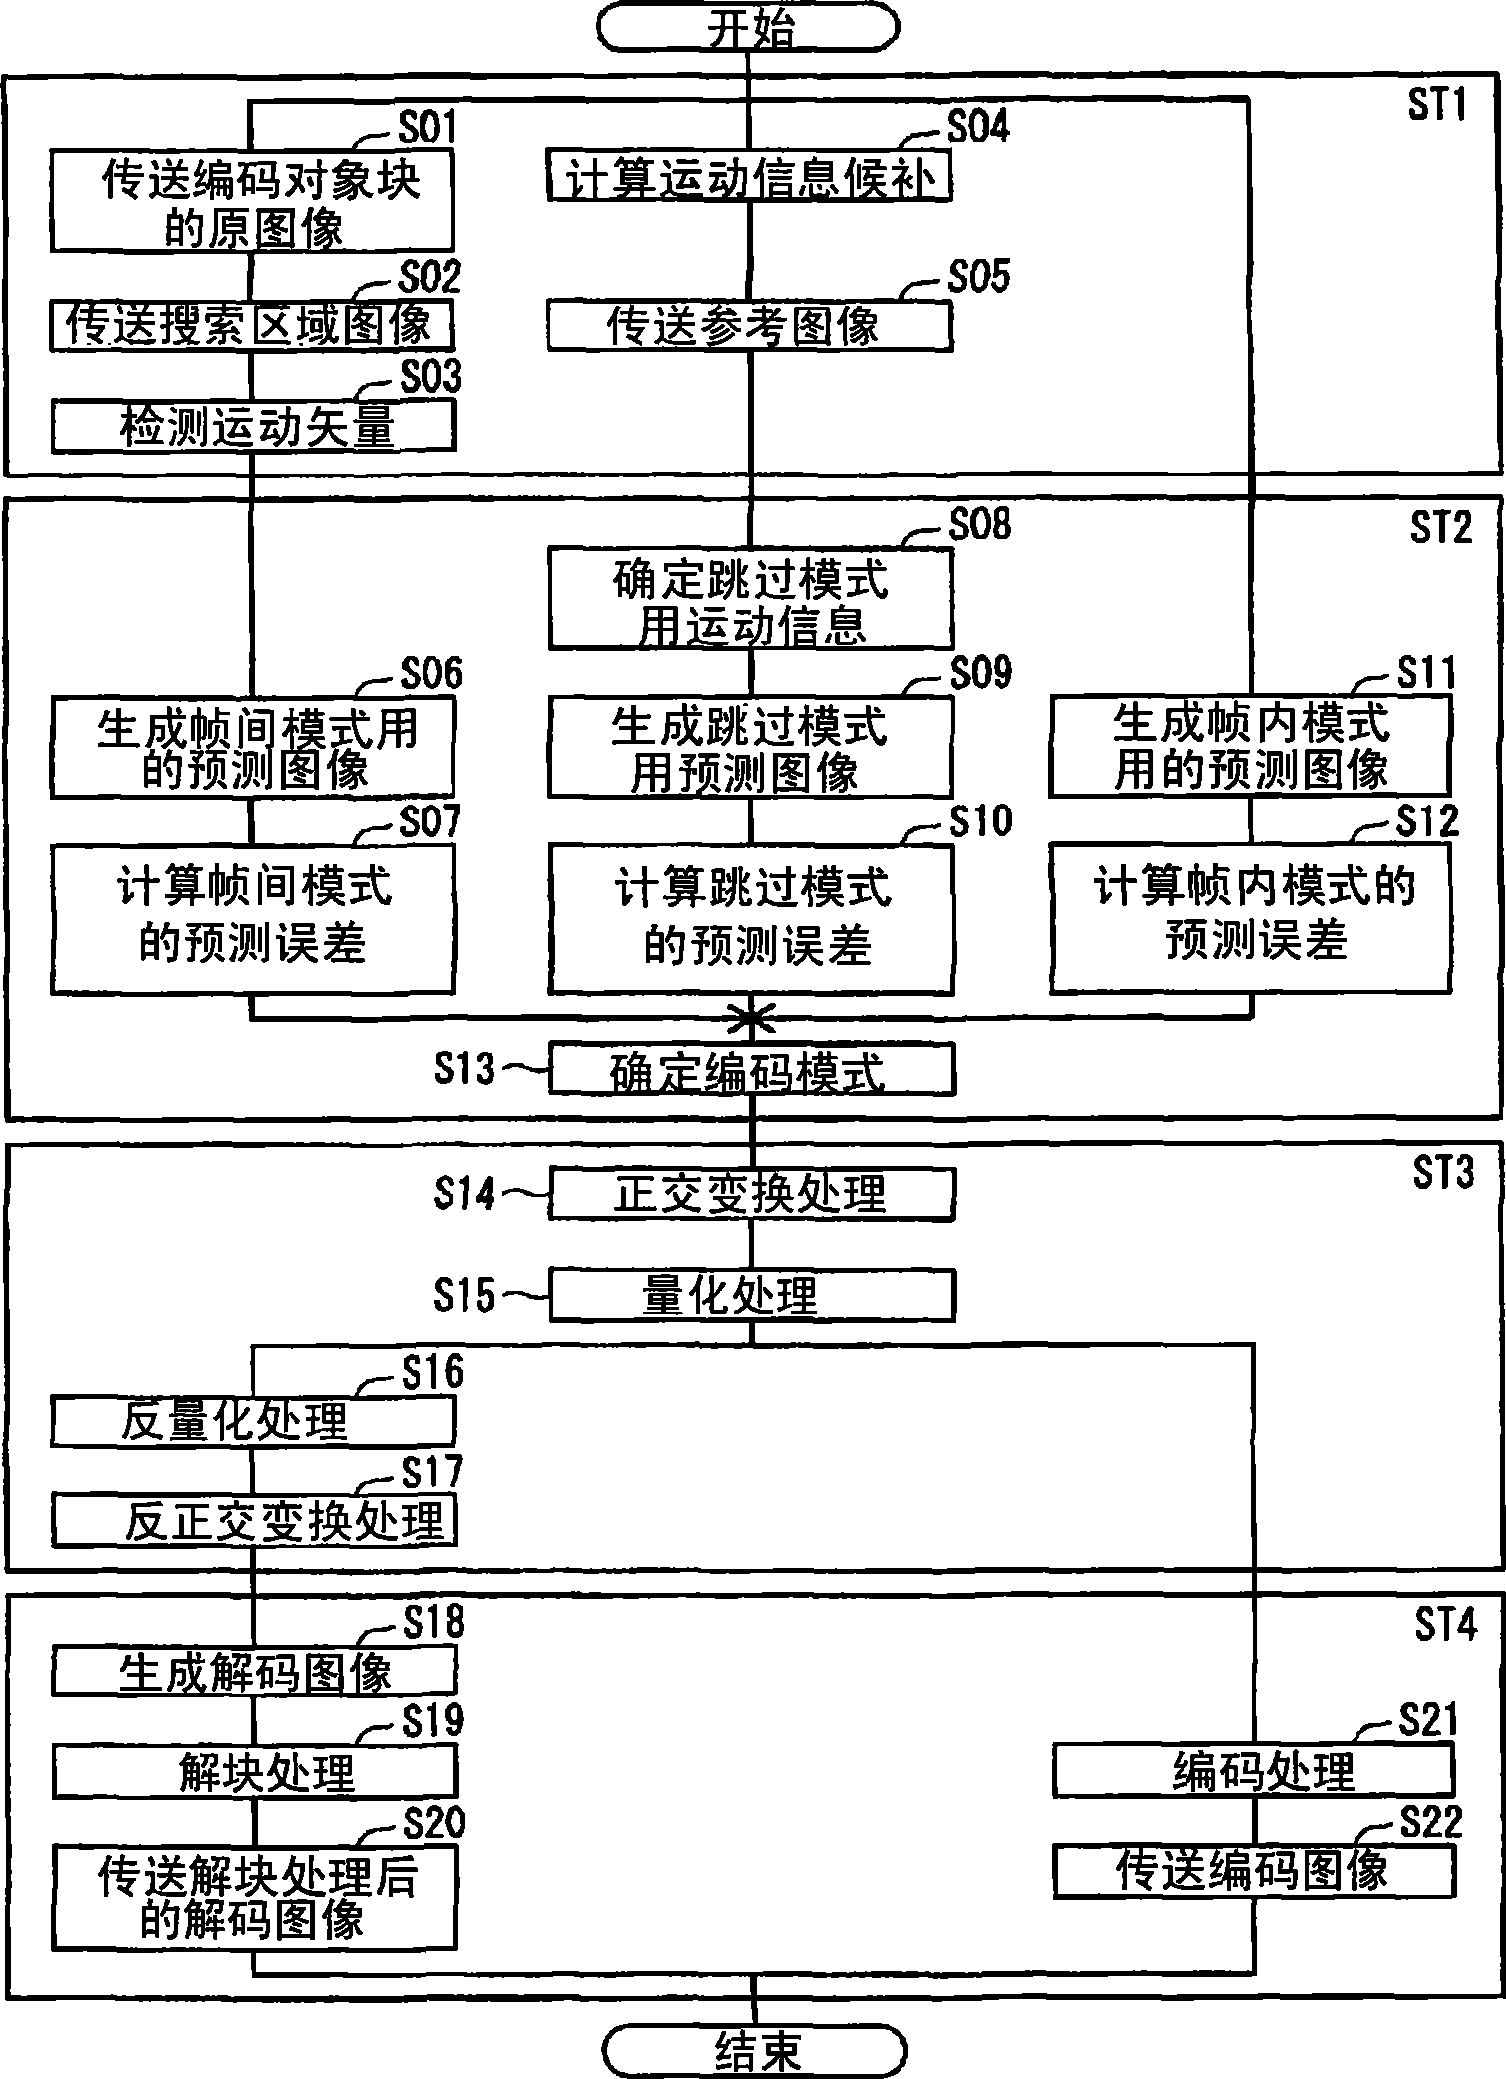 Image coding device, image coding method, and image coding integrated circuit